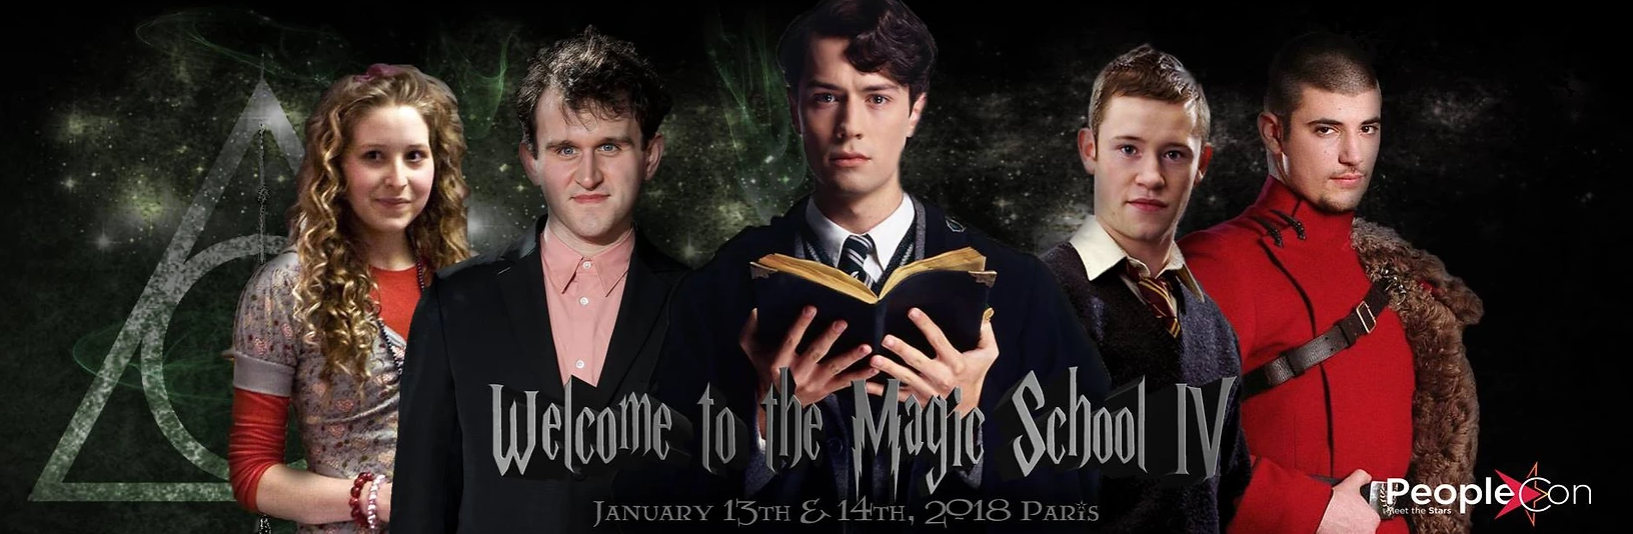 Welcome to the Magic School 4